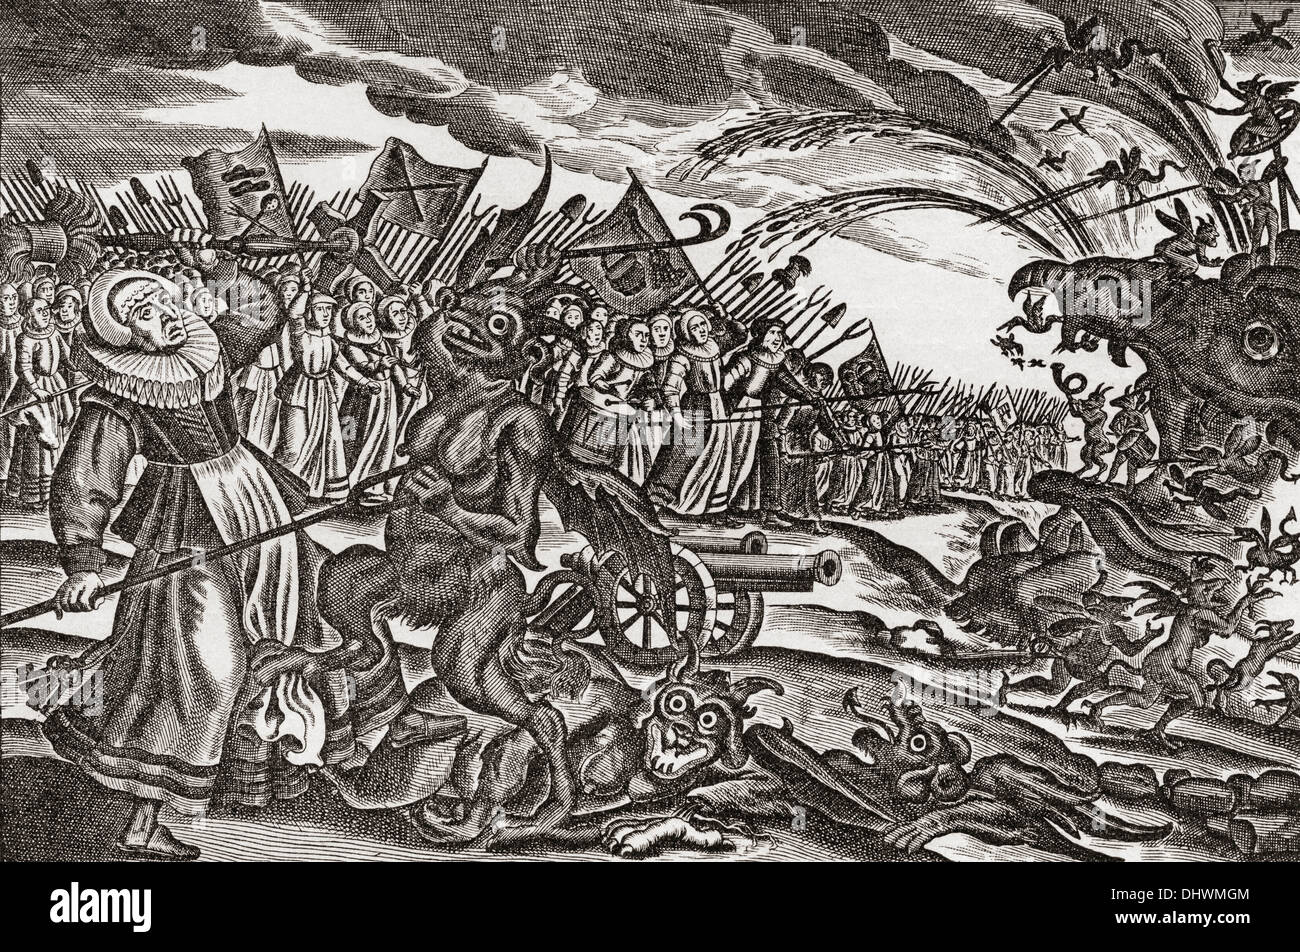 From a 17th century German satirical pamphlet on bad women.  An army of women appear to be confronting an army of monsters... Stock Photo